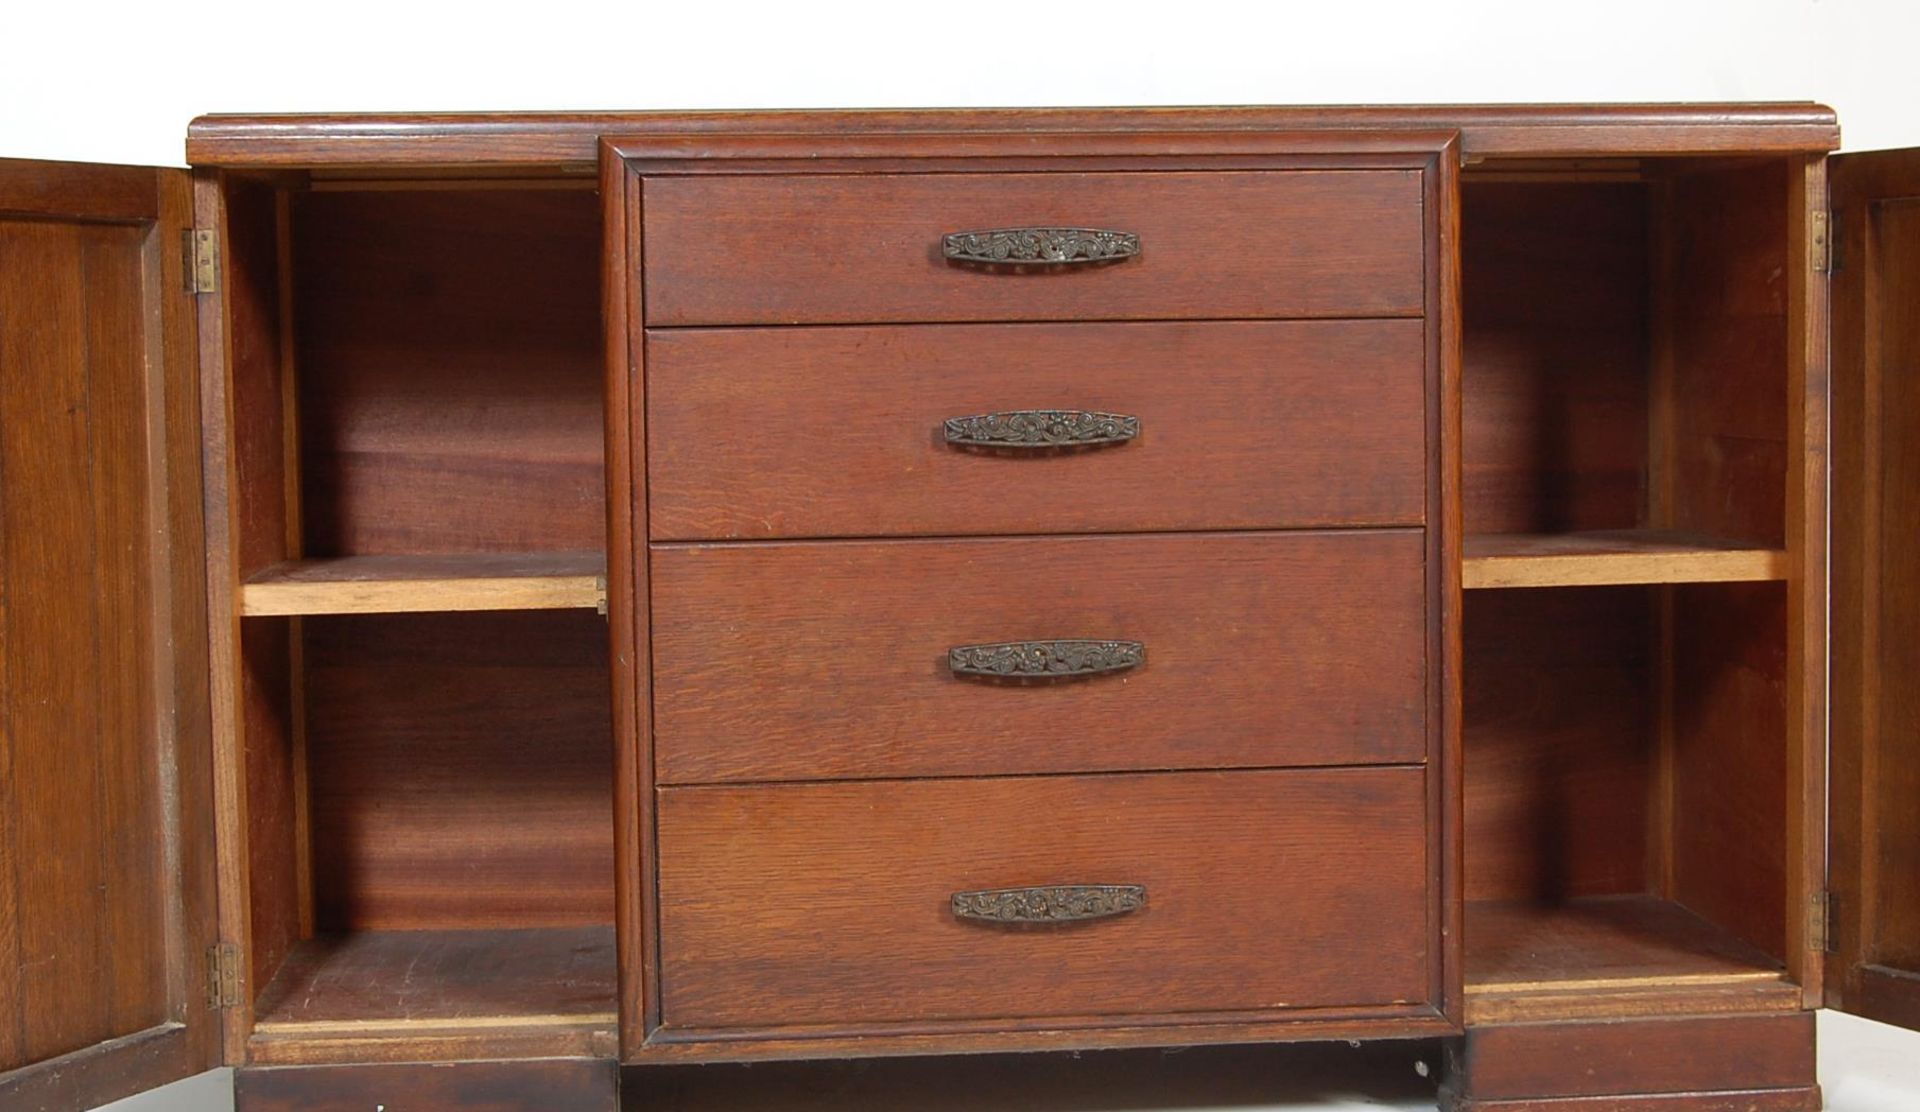 1930’S ART DECO OAK SIDEBOARD DRESSER WITH DRAWERS AND CUPBOARD - Image 5 of 6